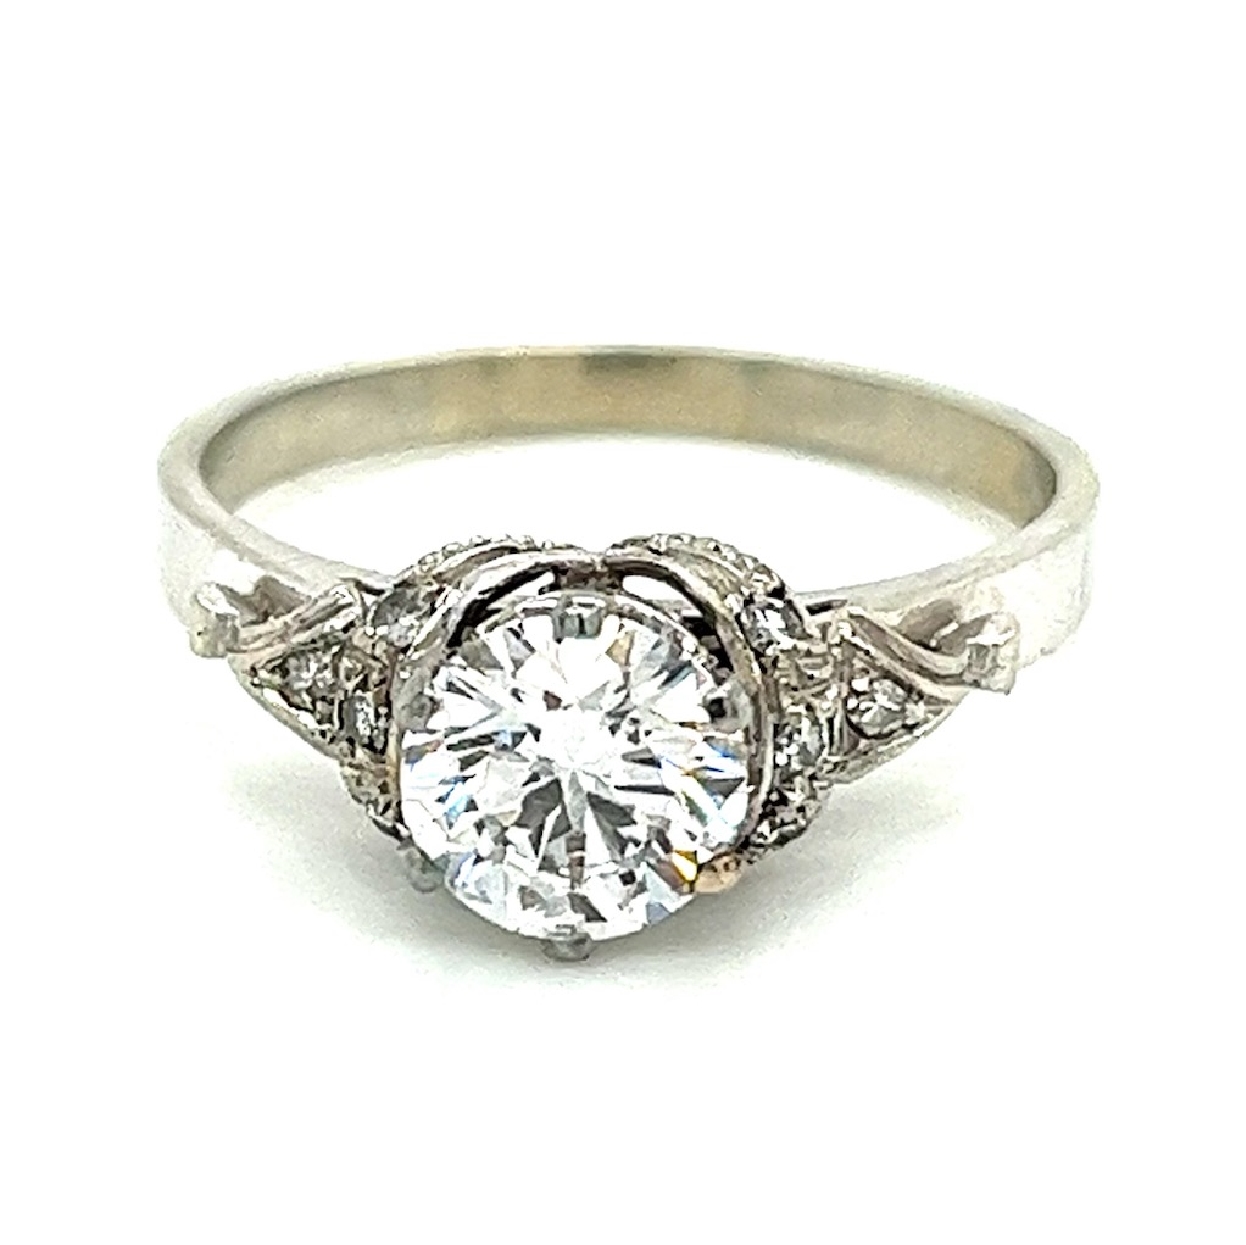 18K WG Diamond Solitare Ring with Ribbon Design Metal Work and Diamond Accents

1.05ct E/VVS2 Round Lab Grown Diamond Center 
GIA Grading Available 

Size 8